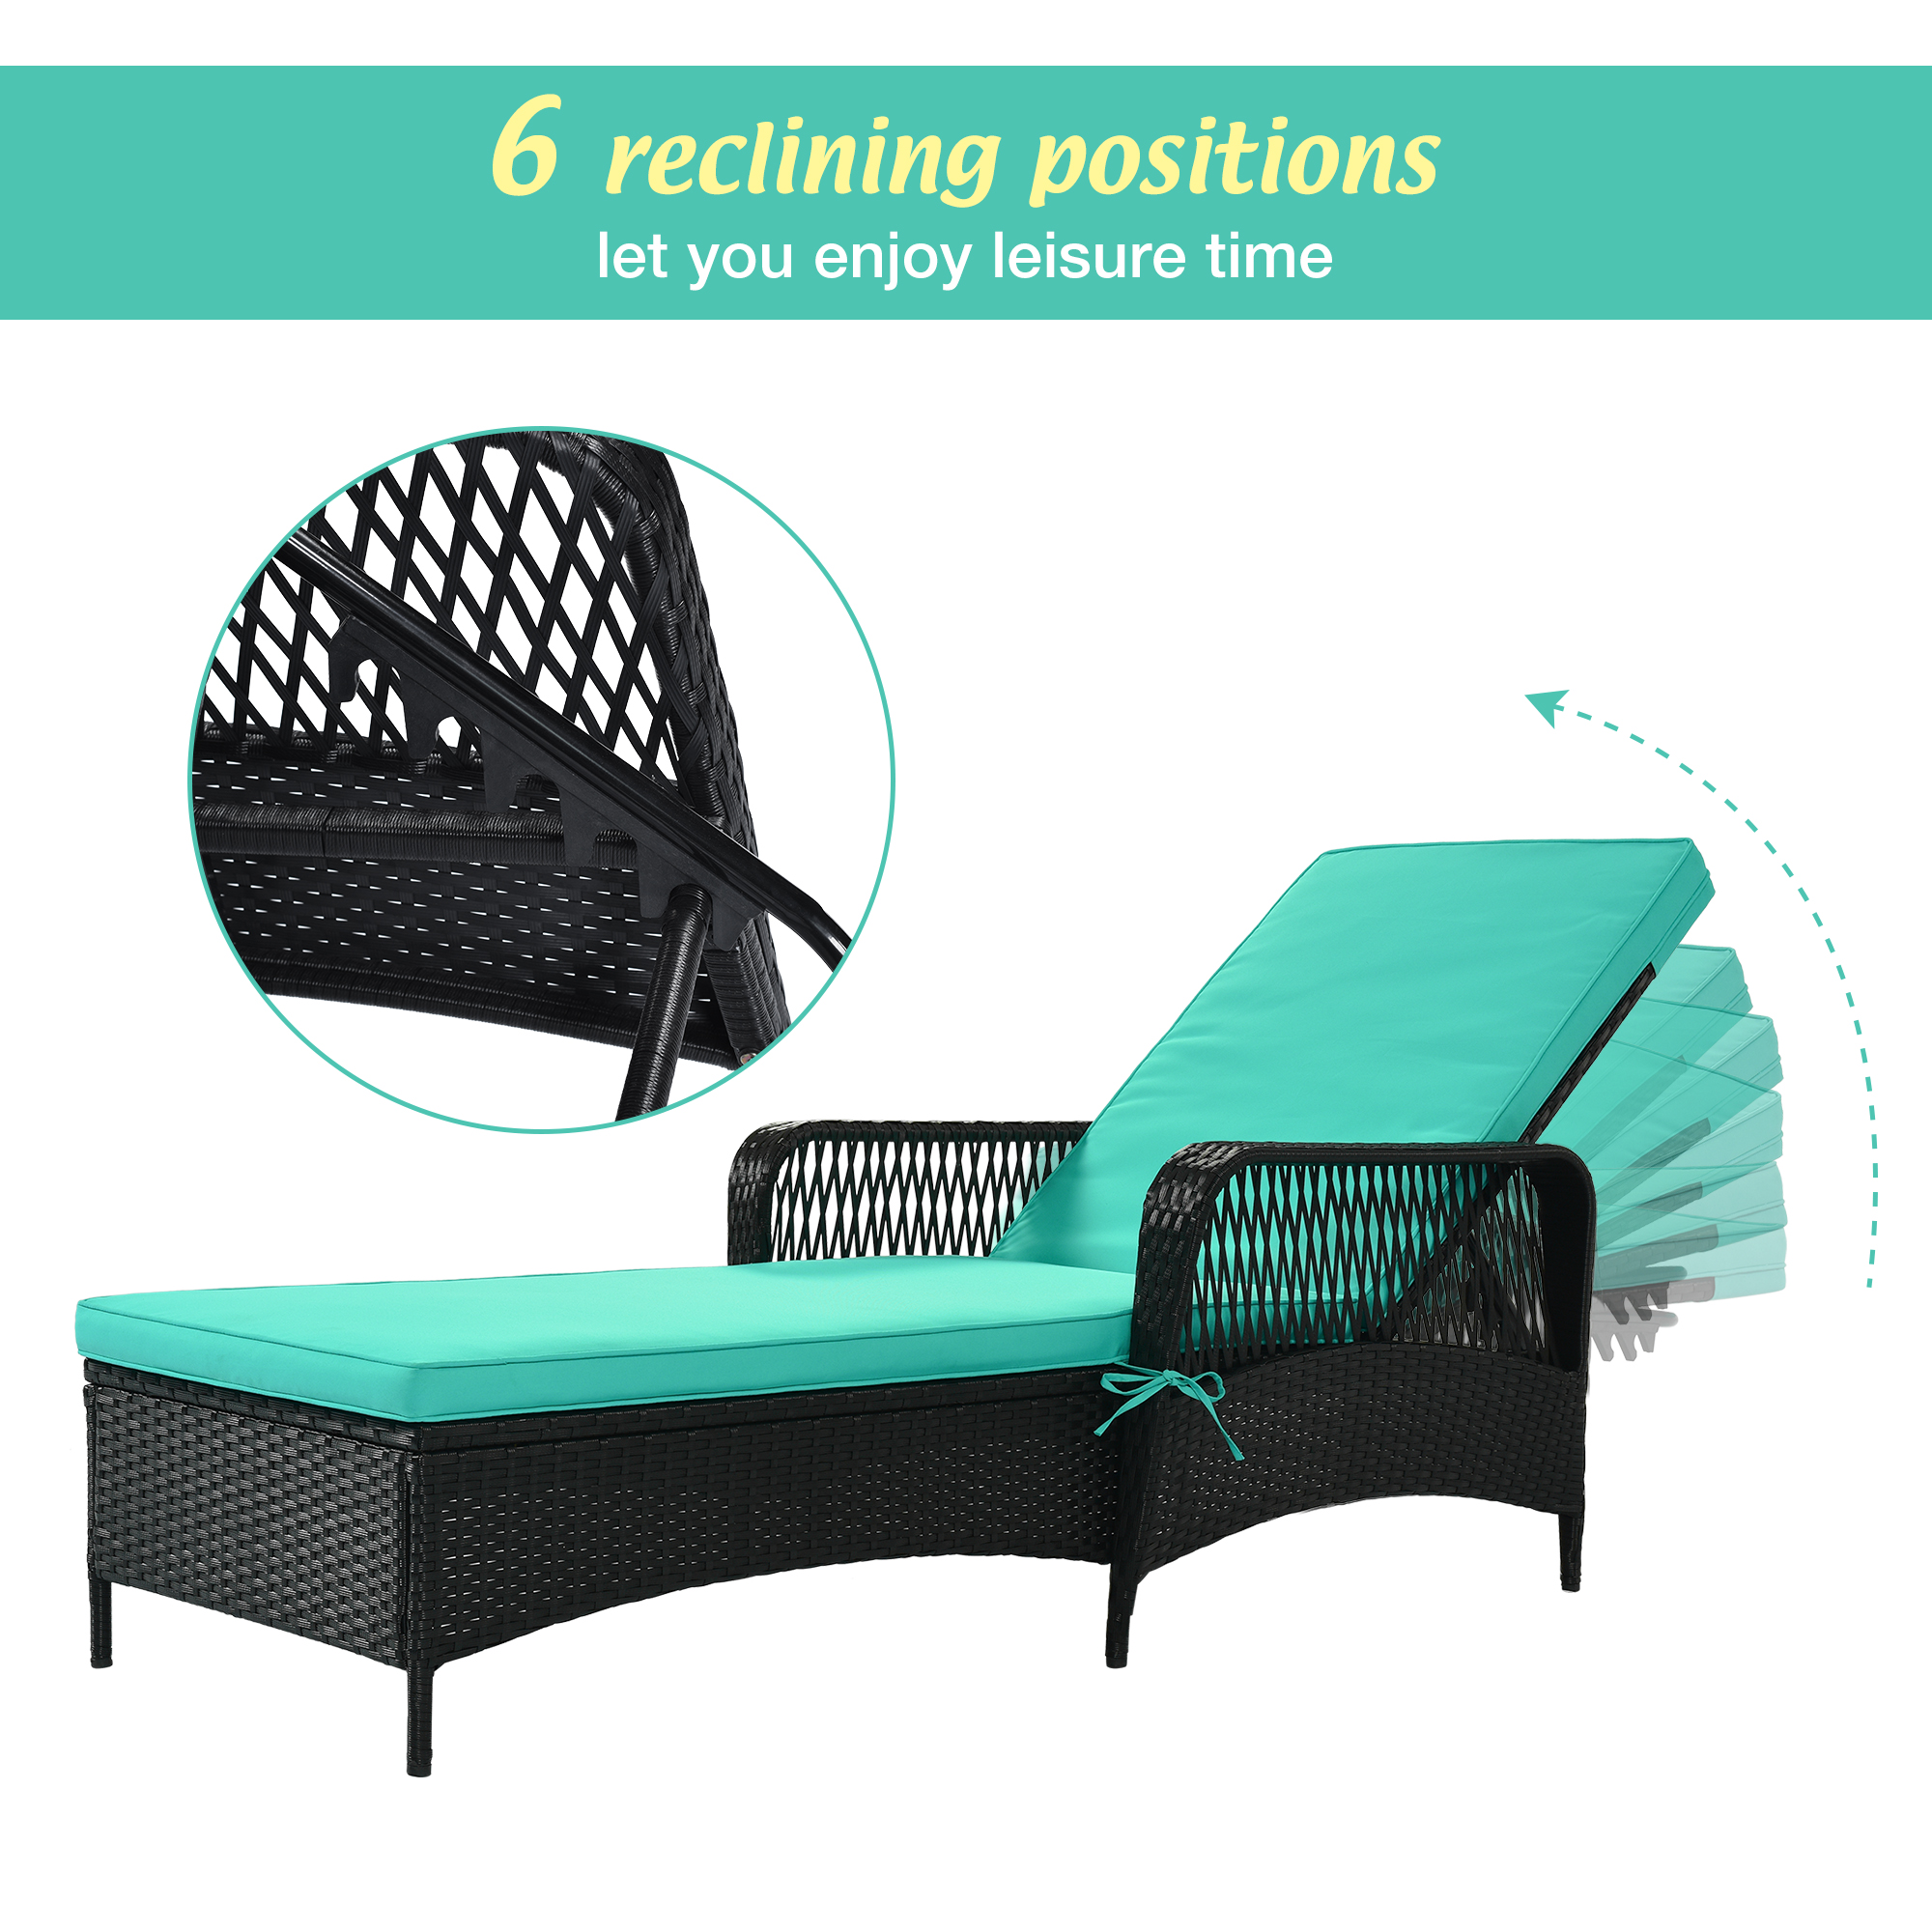 SYNGAR Patio Lounge Chair, Patio Chaise Lounges with Thickened Cushion, PE Rattan Steel Frame Pool Lounge Chair for Patio Backyard Porch Garden Poolside, Green - image 4 of 10